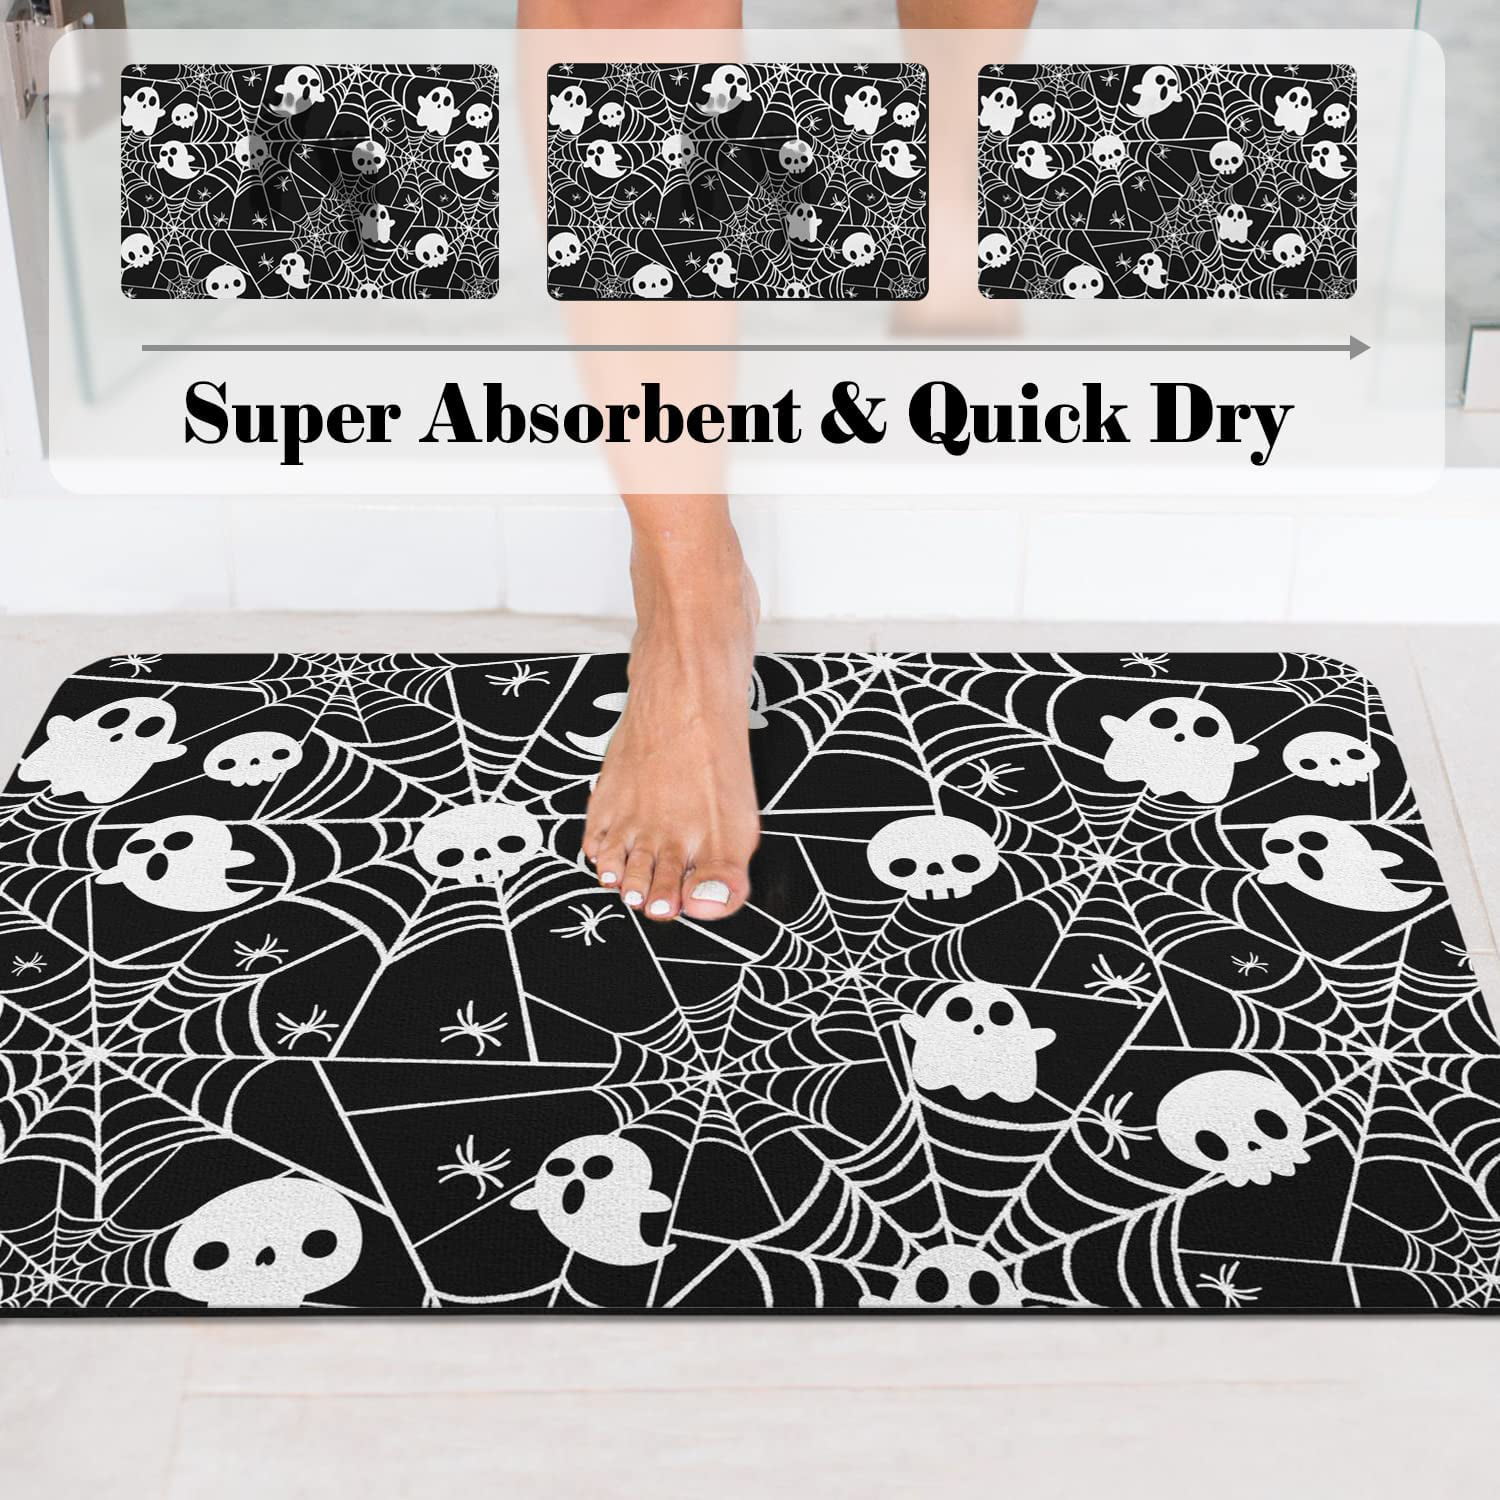 GTMAT Skull Smoking on The Sunset Beach Bathroom Rugs,Soft Absorbent Bath  Mat,Machine Washable Dry Bath Mats for Indoor Living Room, Tub and Shower